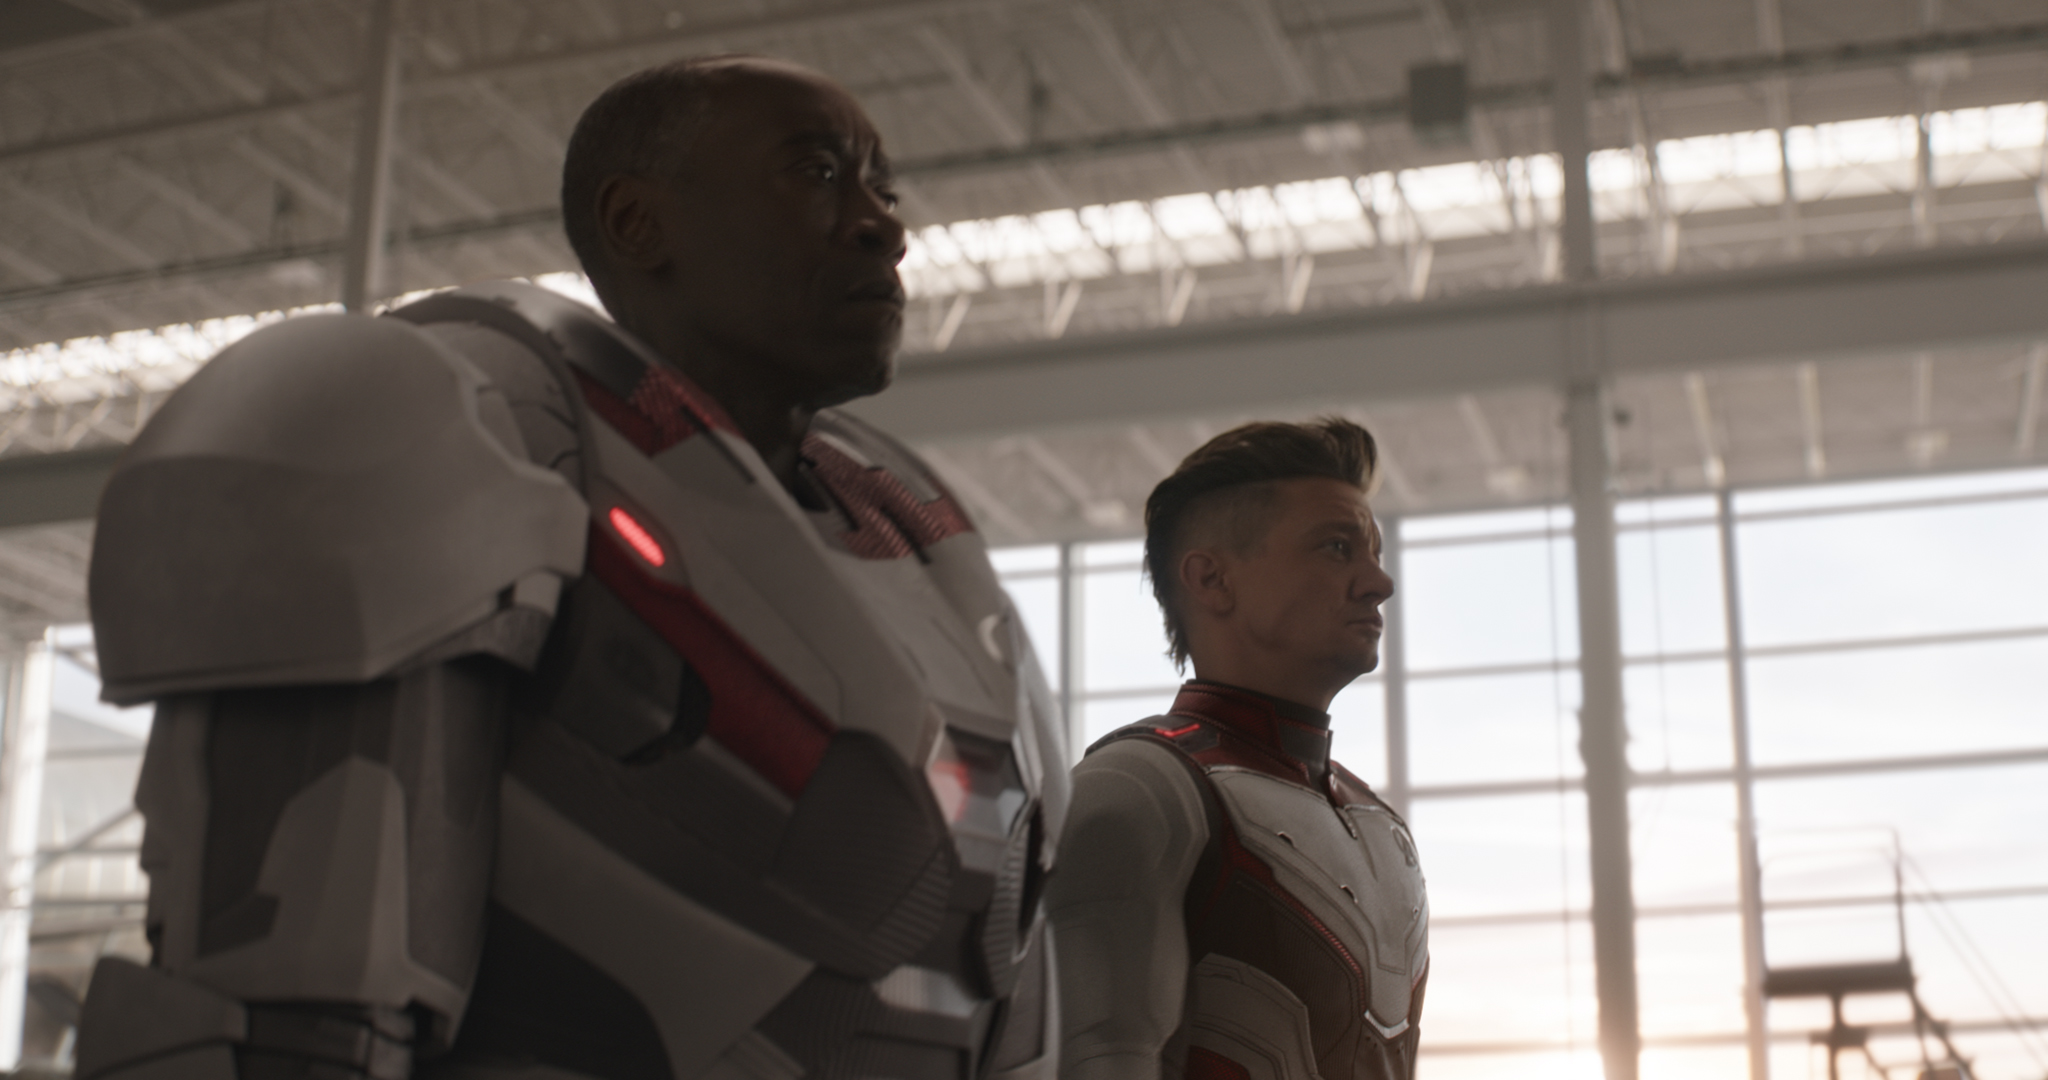 Still from 'Avengers: Endgame' featuring War Machine/James Rhodey (Don Cheadle) and Hawkeye/Clint Barton (Jeremy Renner). (Film Frame—Marvel Studios 2019)